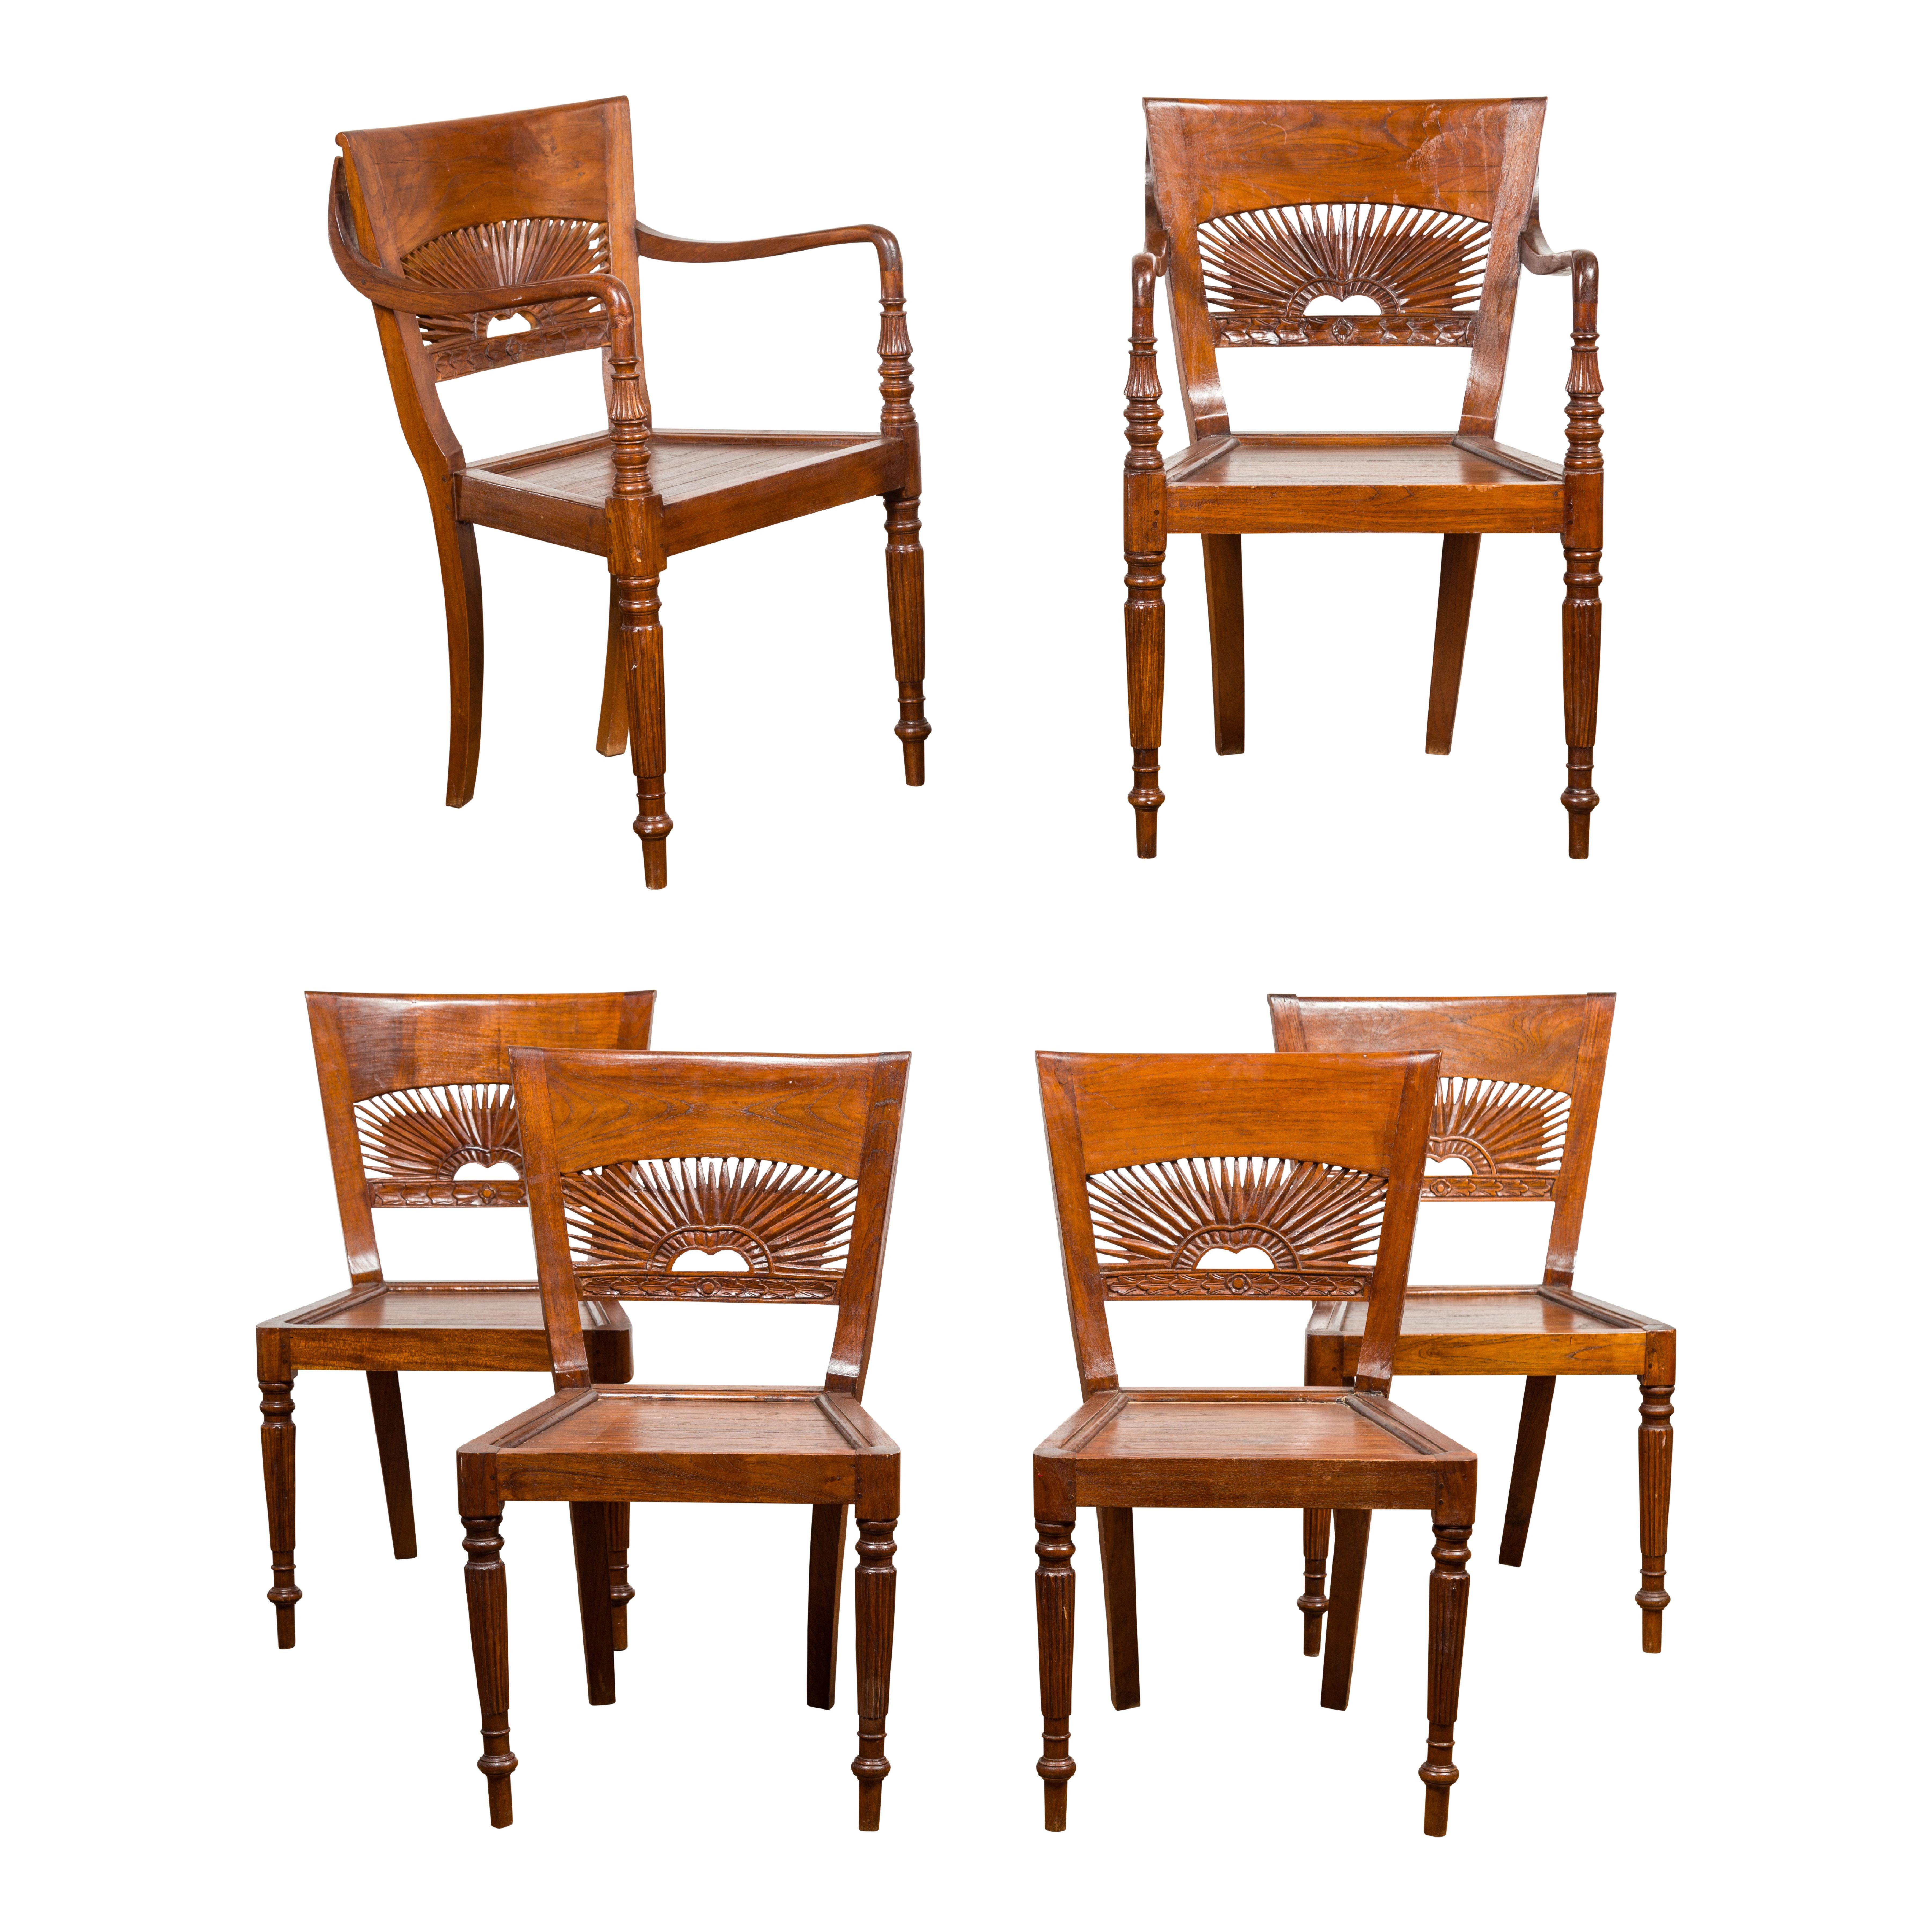 Dutch Colonial Teak Dining Room Chairs with Carved Radiating Backs, Set of Six For Sale